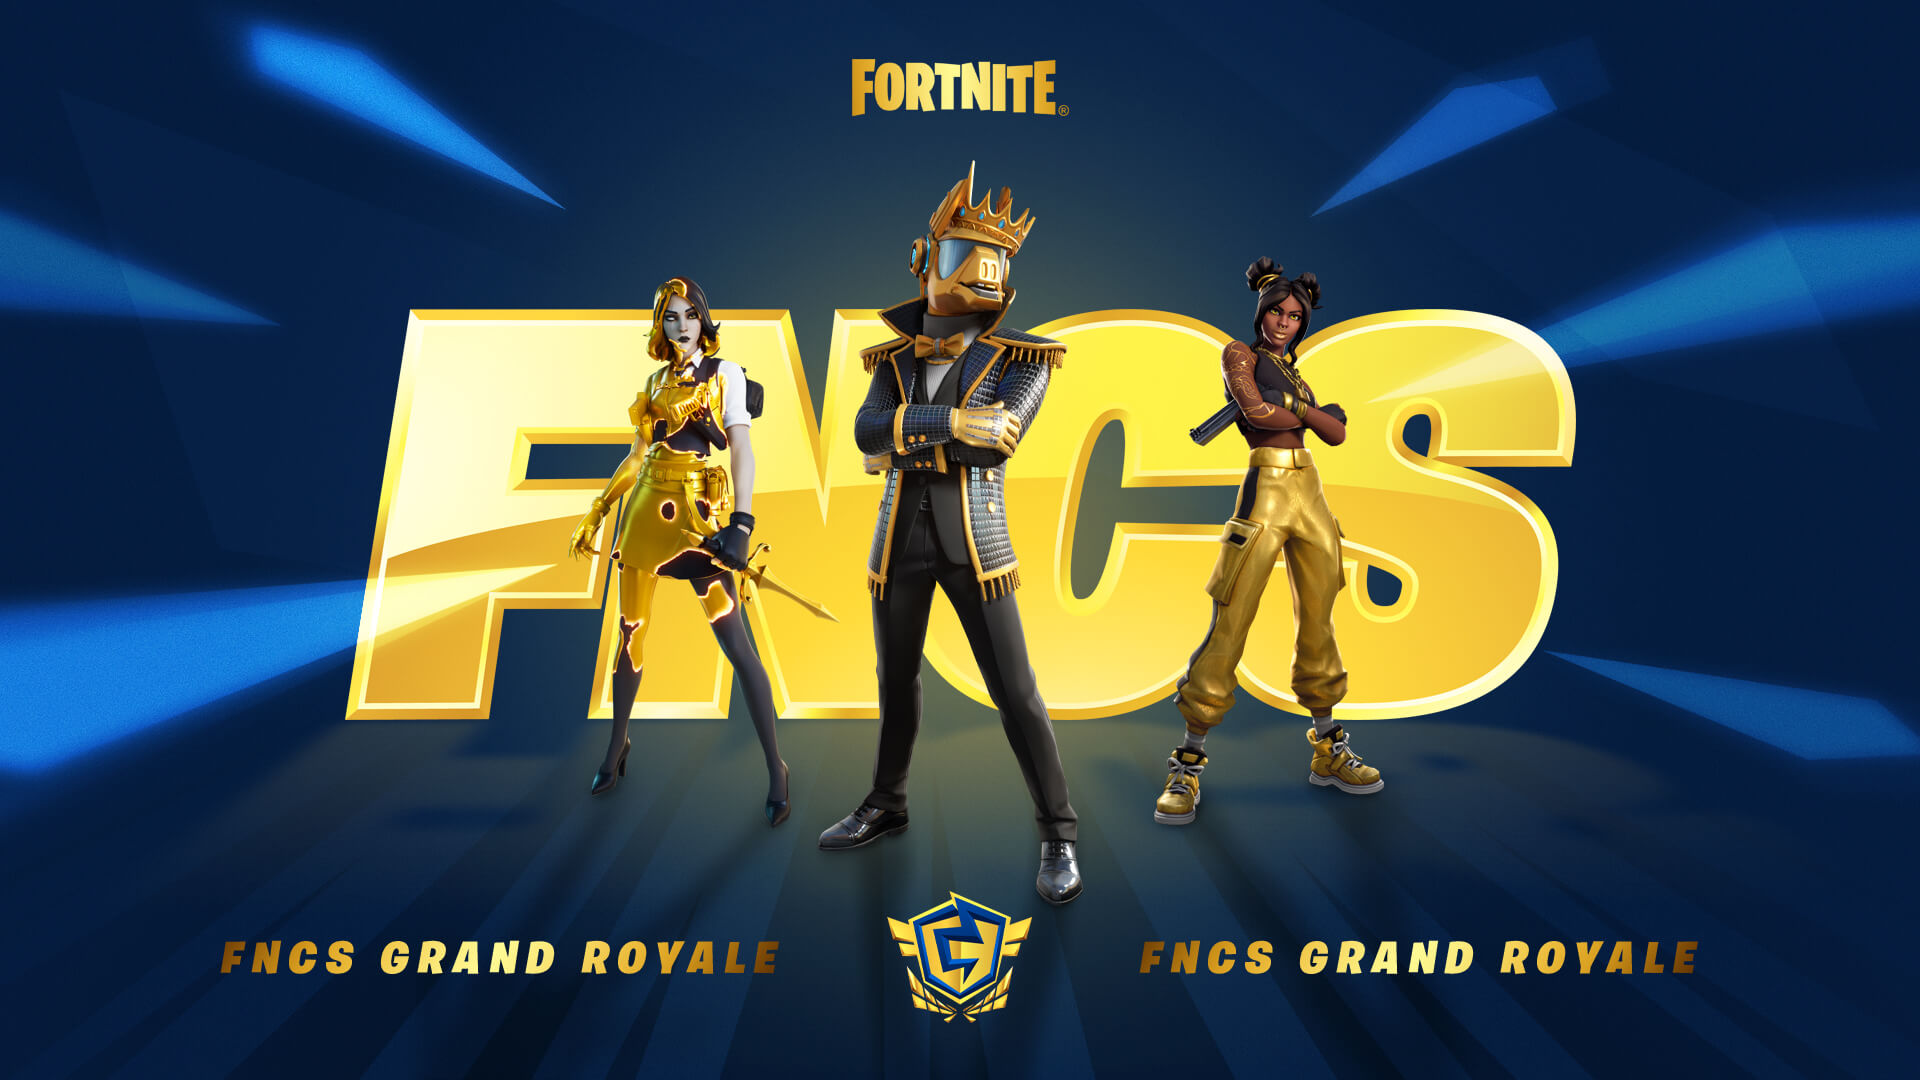 Fortnite announces Grand Royale Community Cup with free Outfit to be unlocked